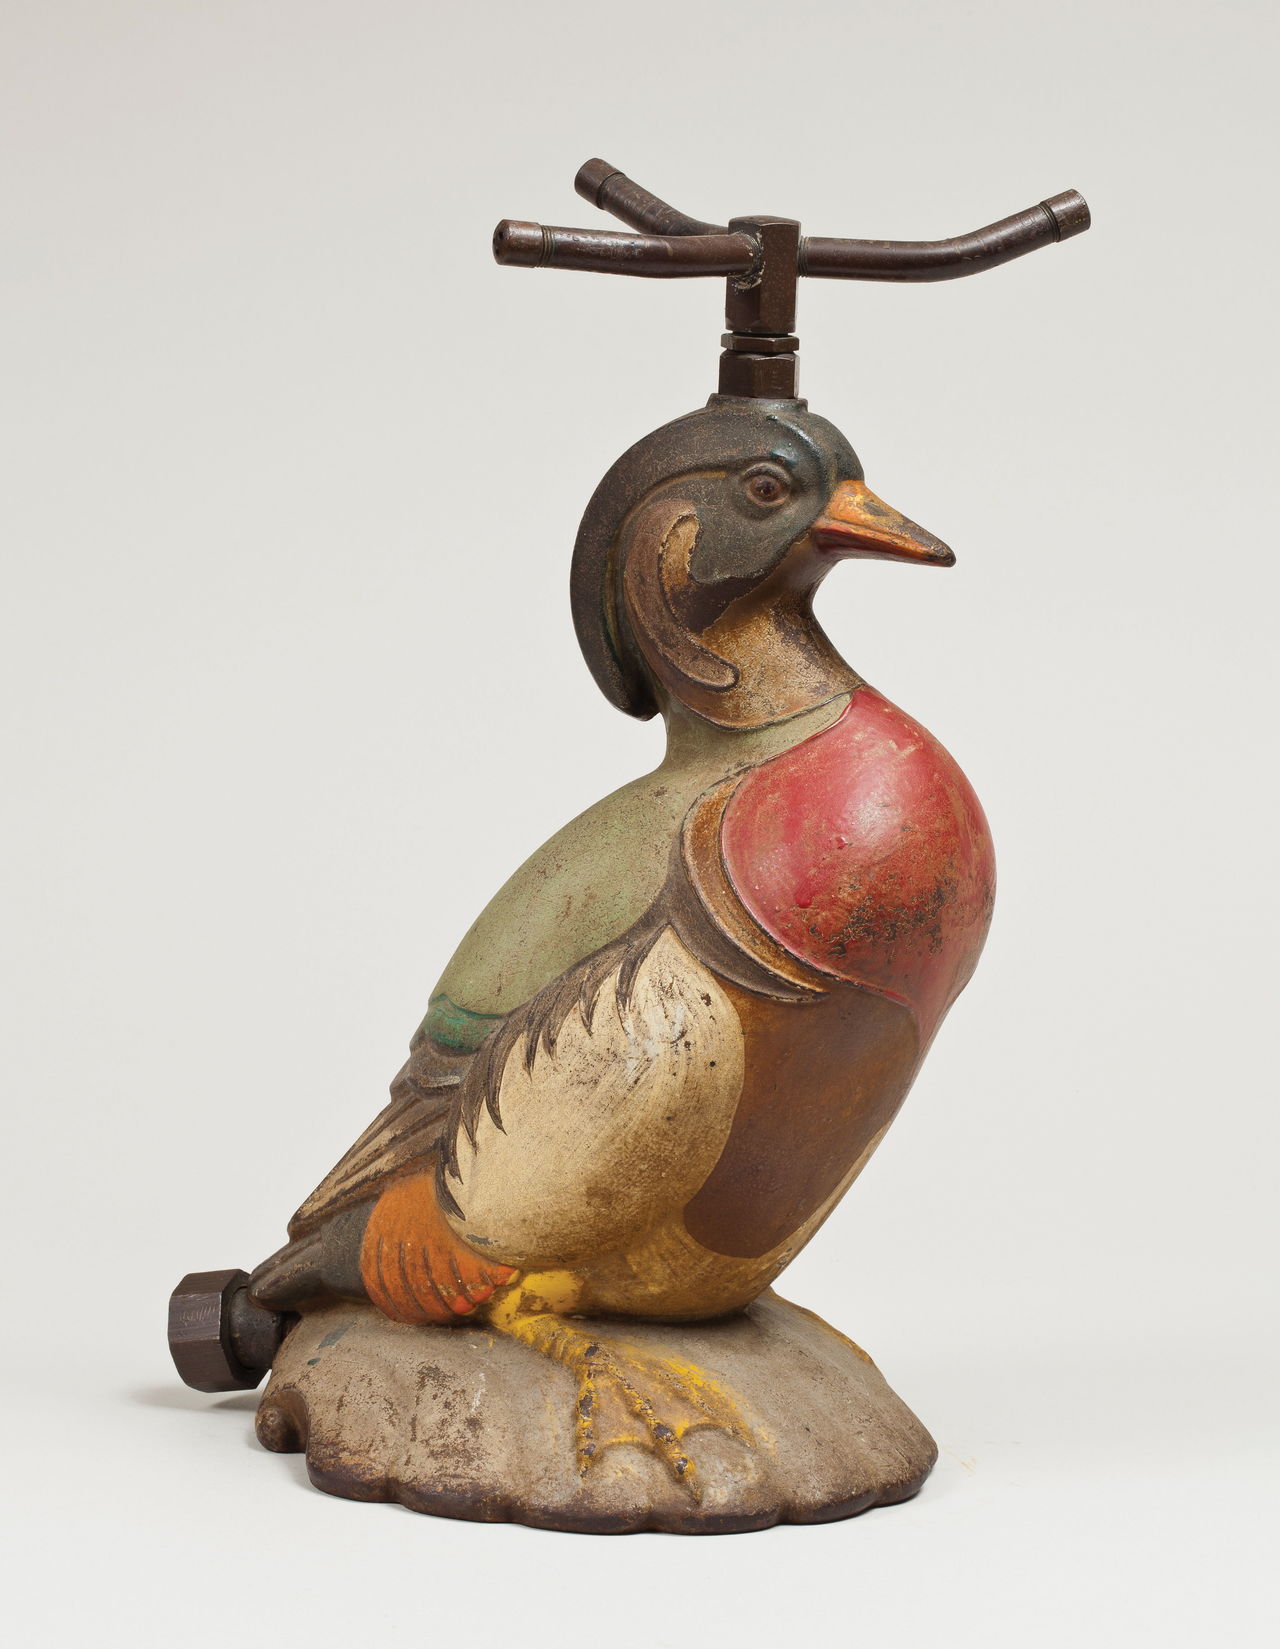 This wood duck-shaped iron sprinkler is in excellent condition. It probably was made in England in the 1920s or ‘30s.